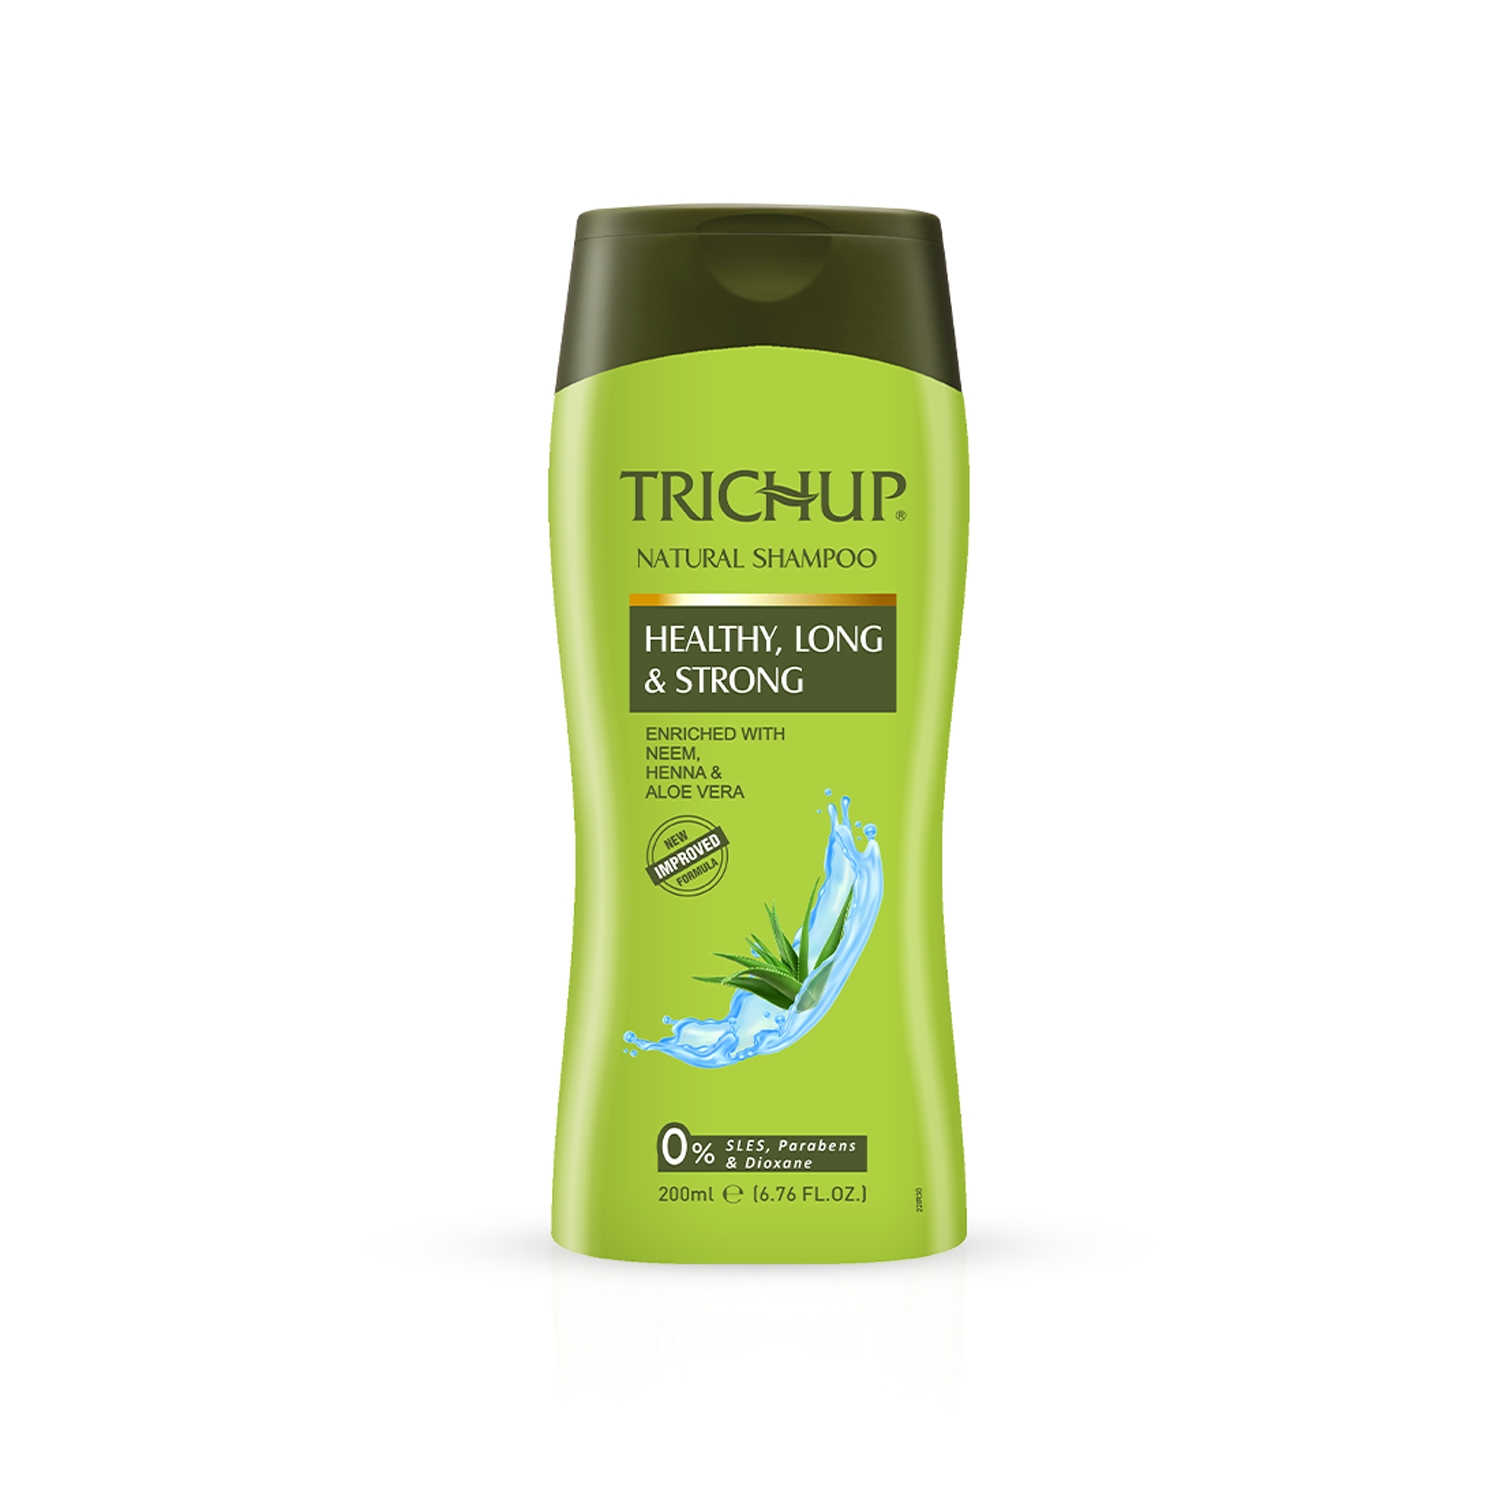 Trichup | Trichup Healthy Long & Strong Natural Shampoo (200ml)